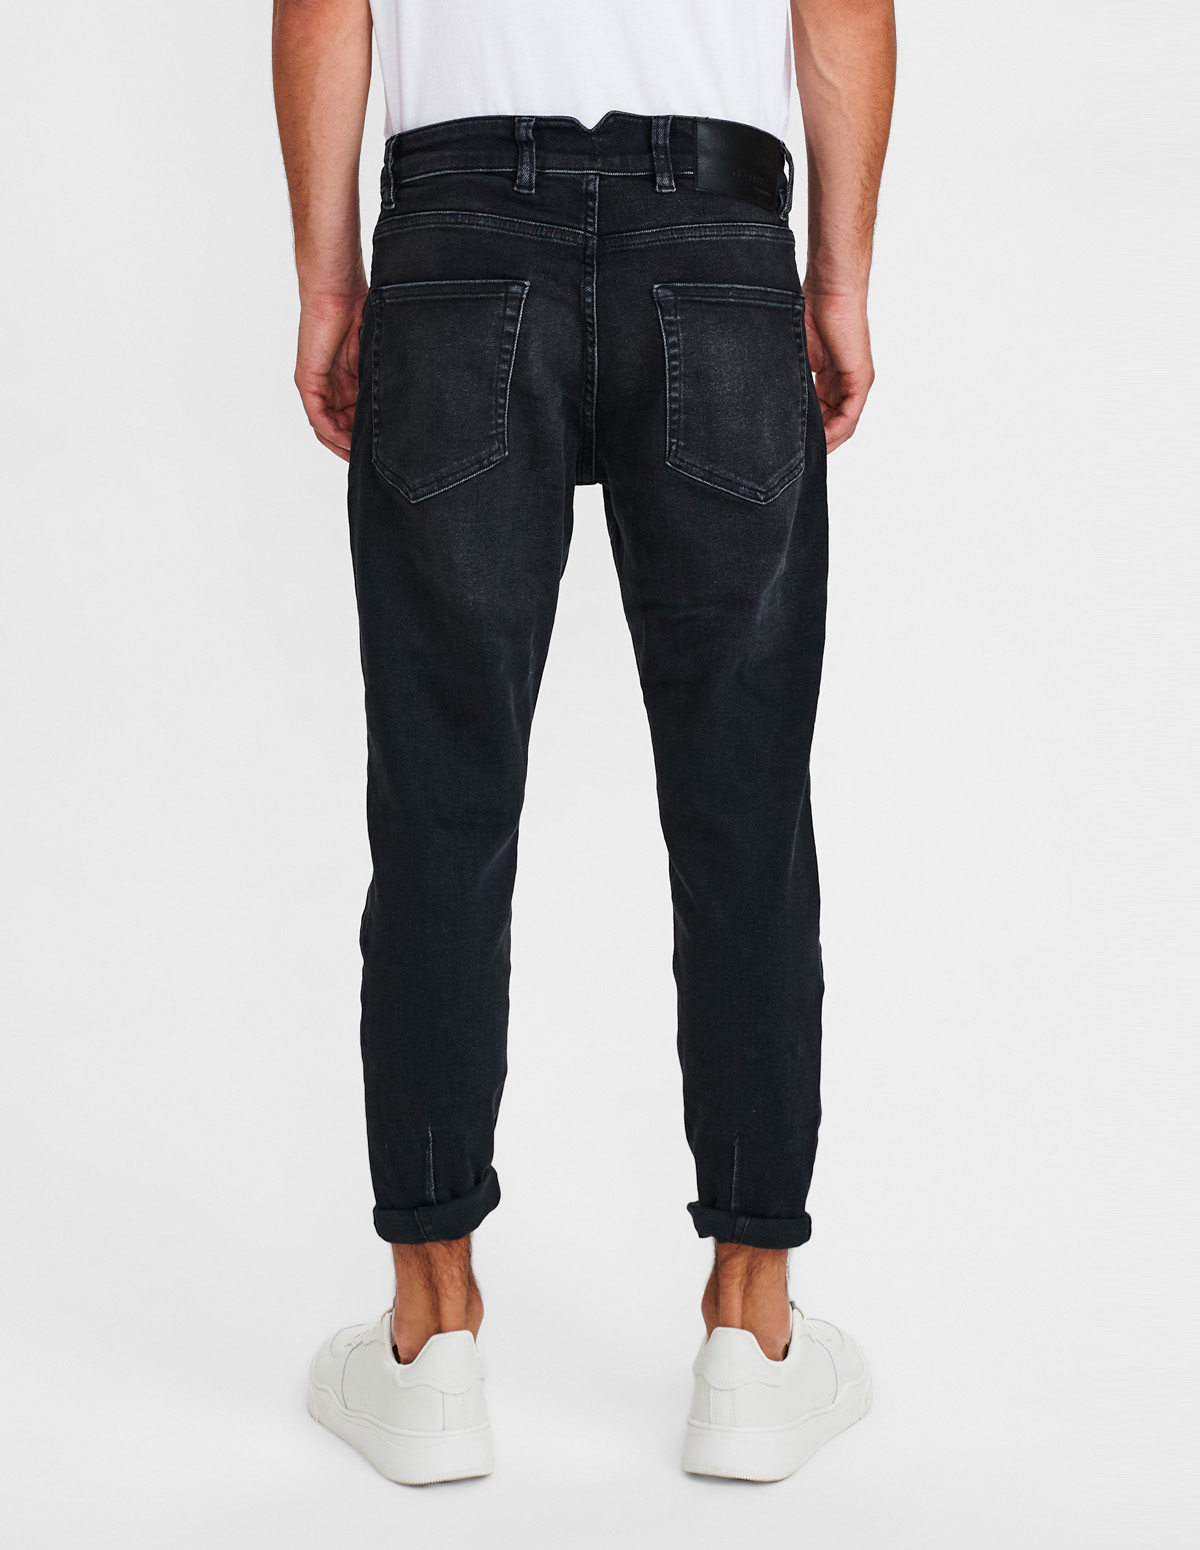 GABBA ΠΑΝΤΕΛΟΝΙ JEAN ΠΕΝΤΑΤΣΕΠΟ RELAXED TAPERED FIT